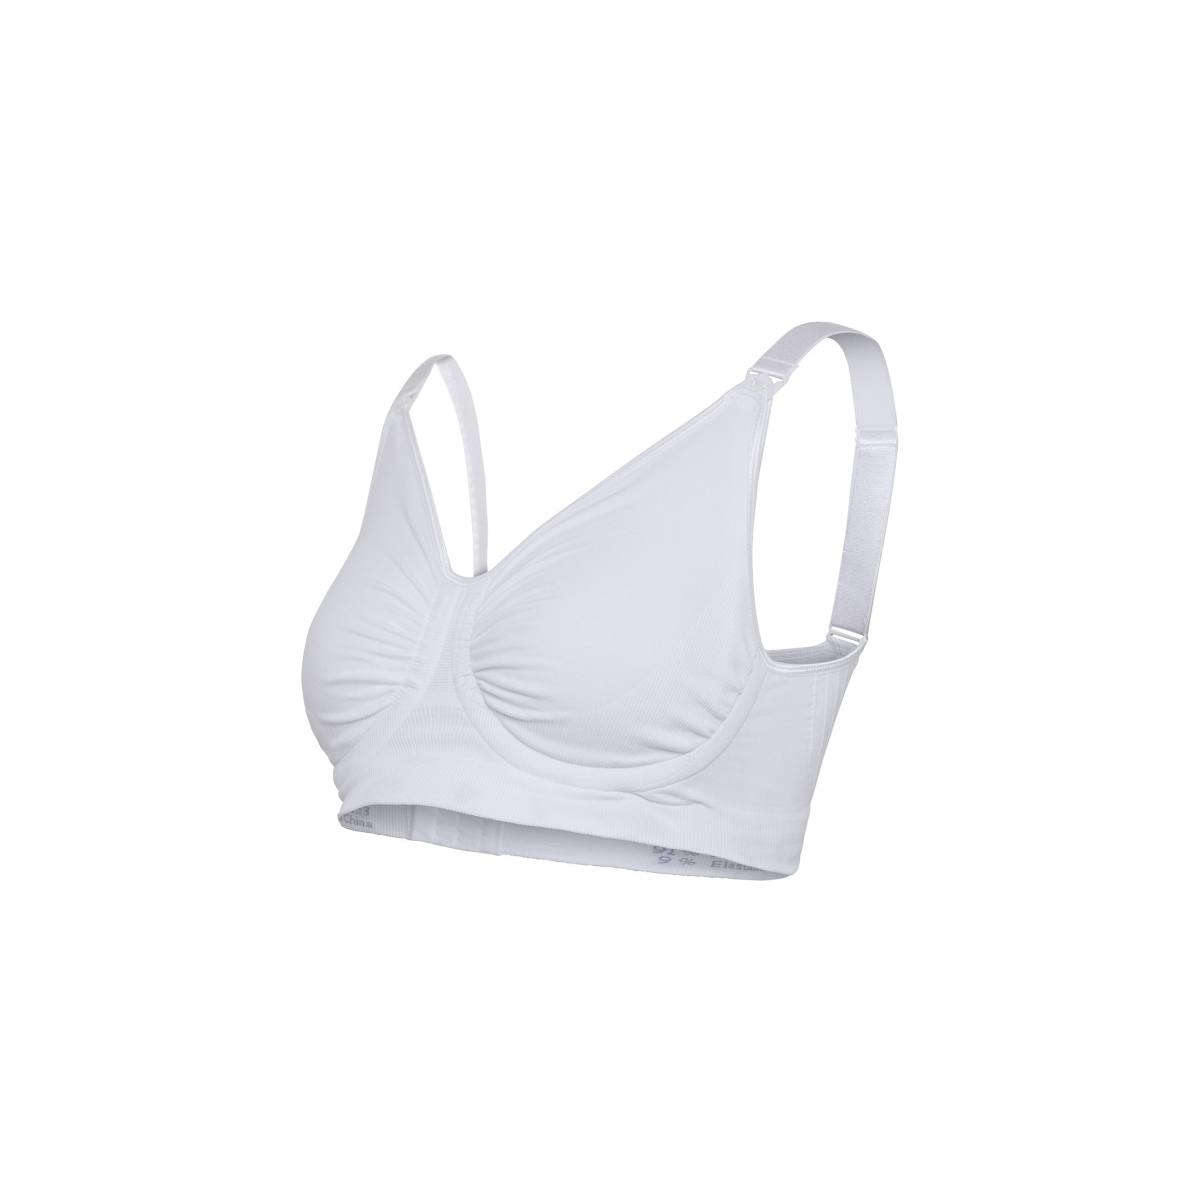 Carriwell Maternity & Nursing Bra with Padded Carri-Gel Support - White (Size - X